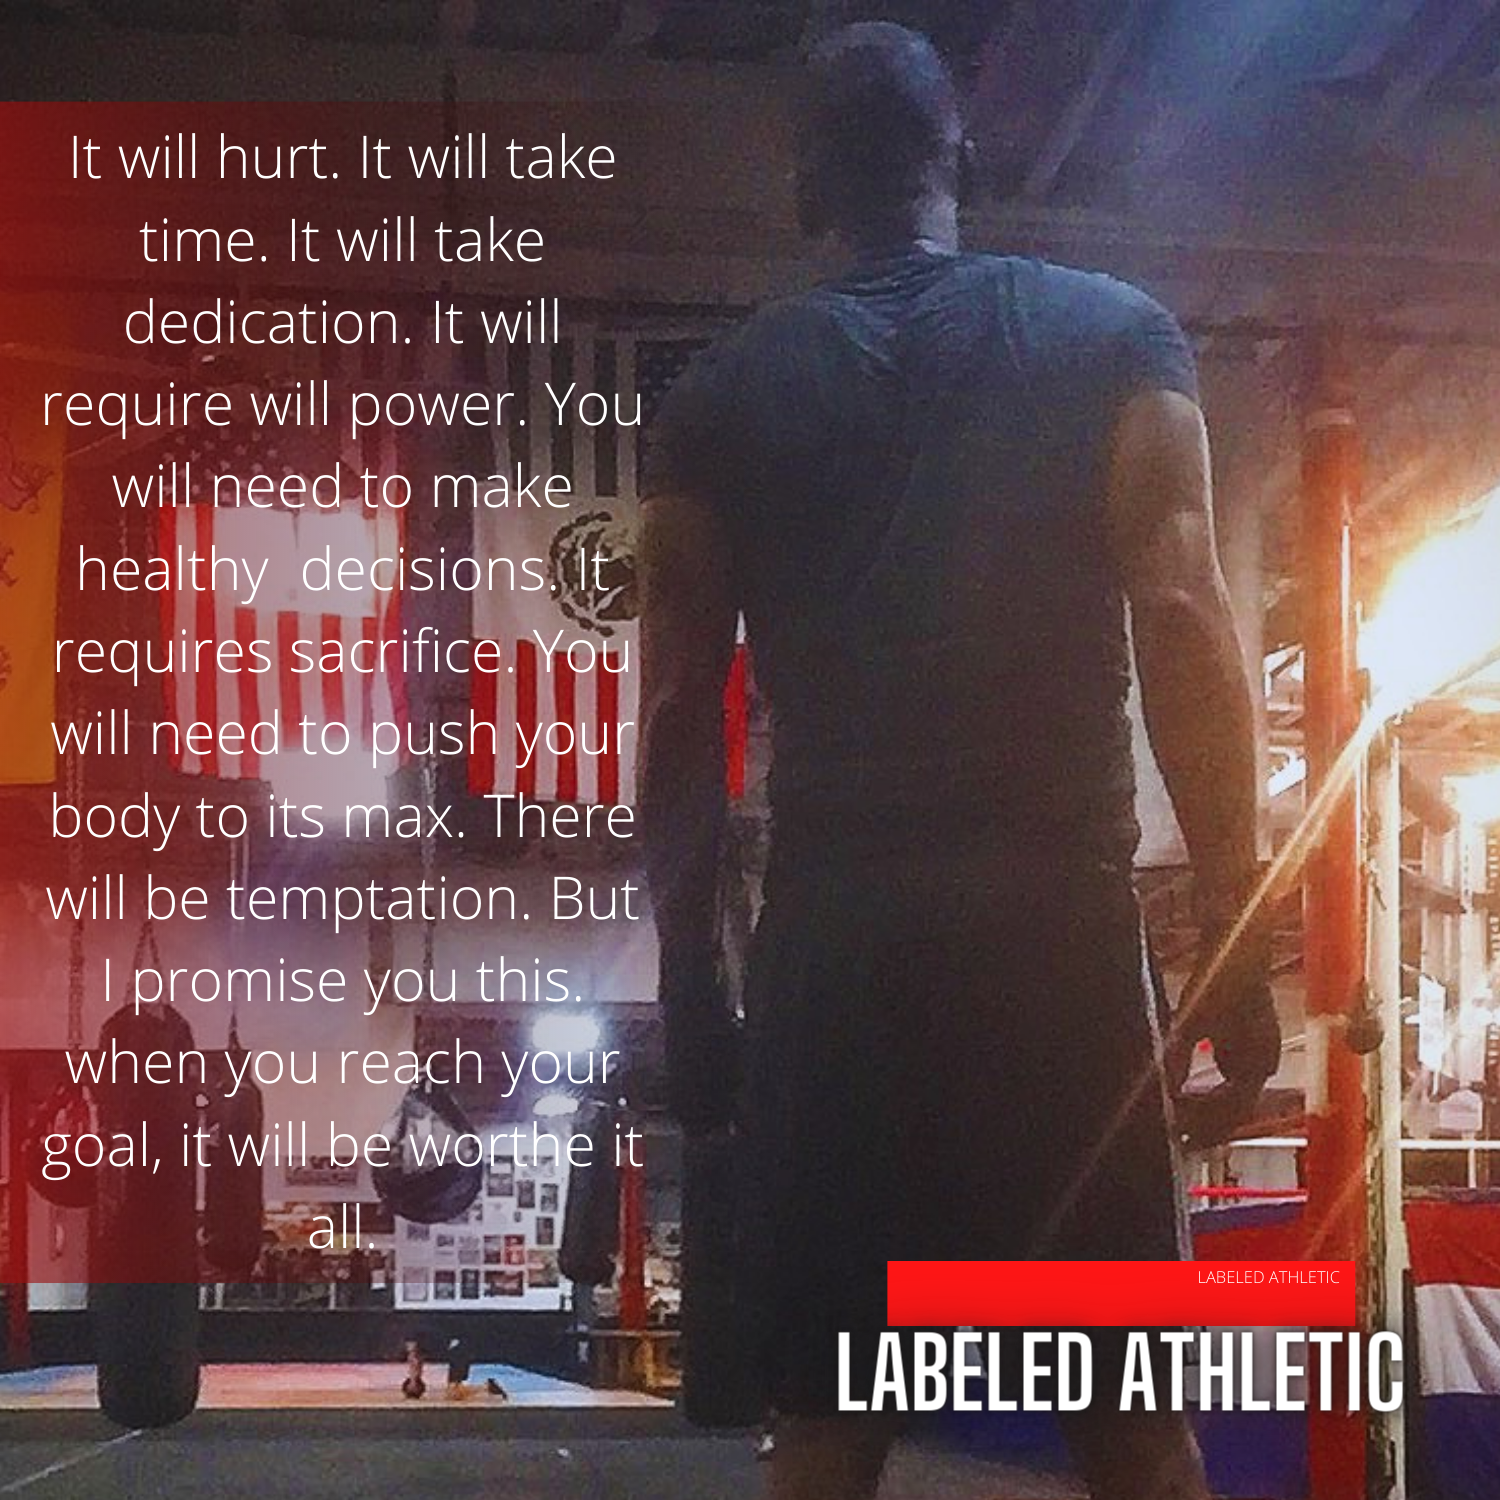 THE ATHLETE’S CREED – IT WILL HURT